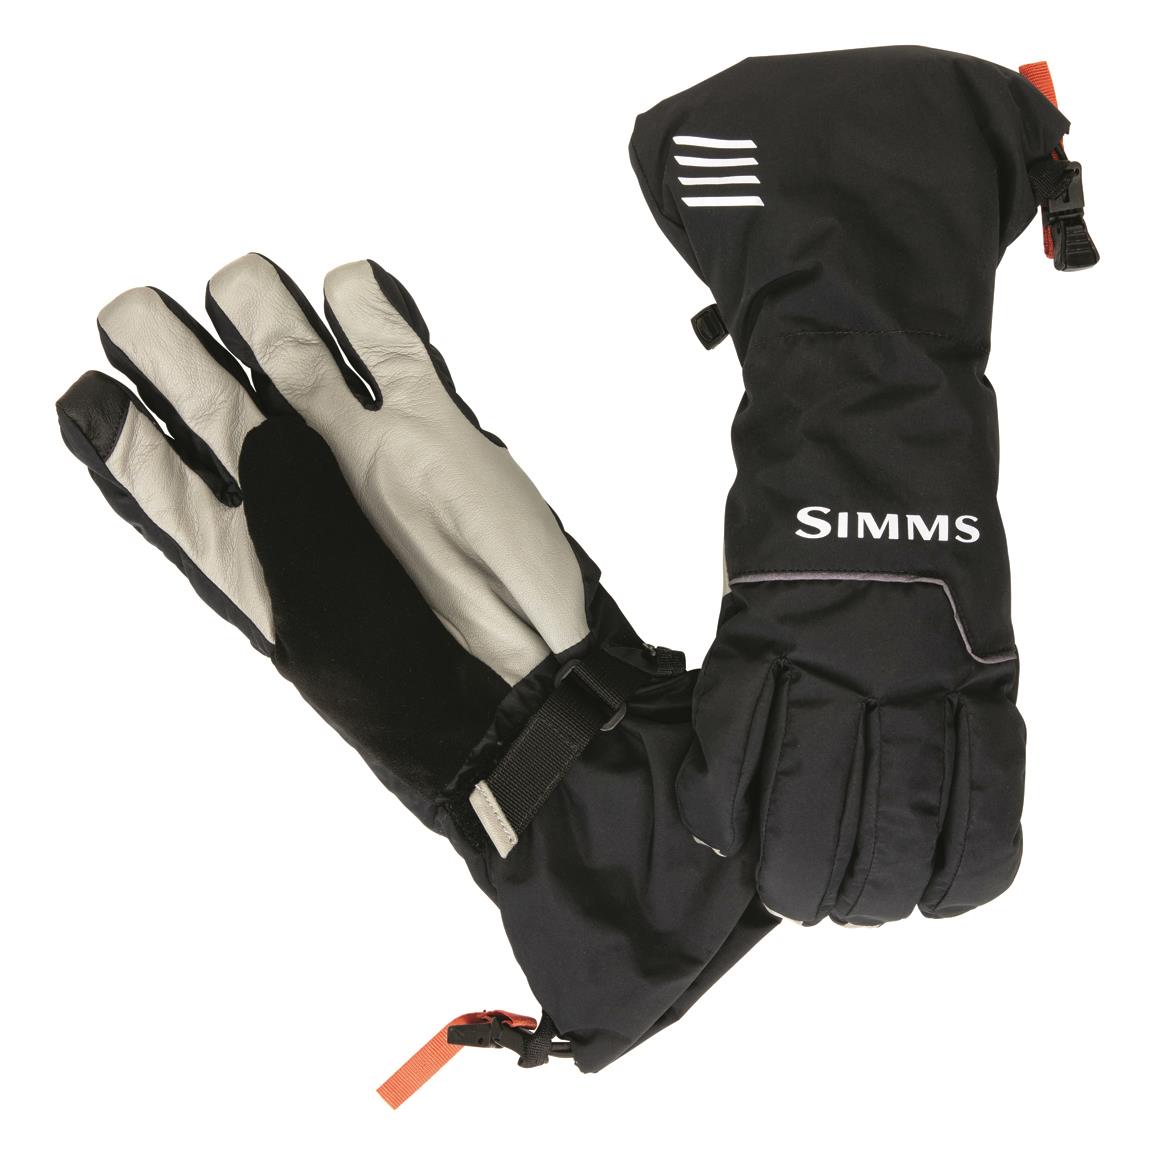 Simms Challenger Waterproof Insulated Gloves., Black